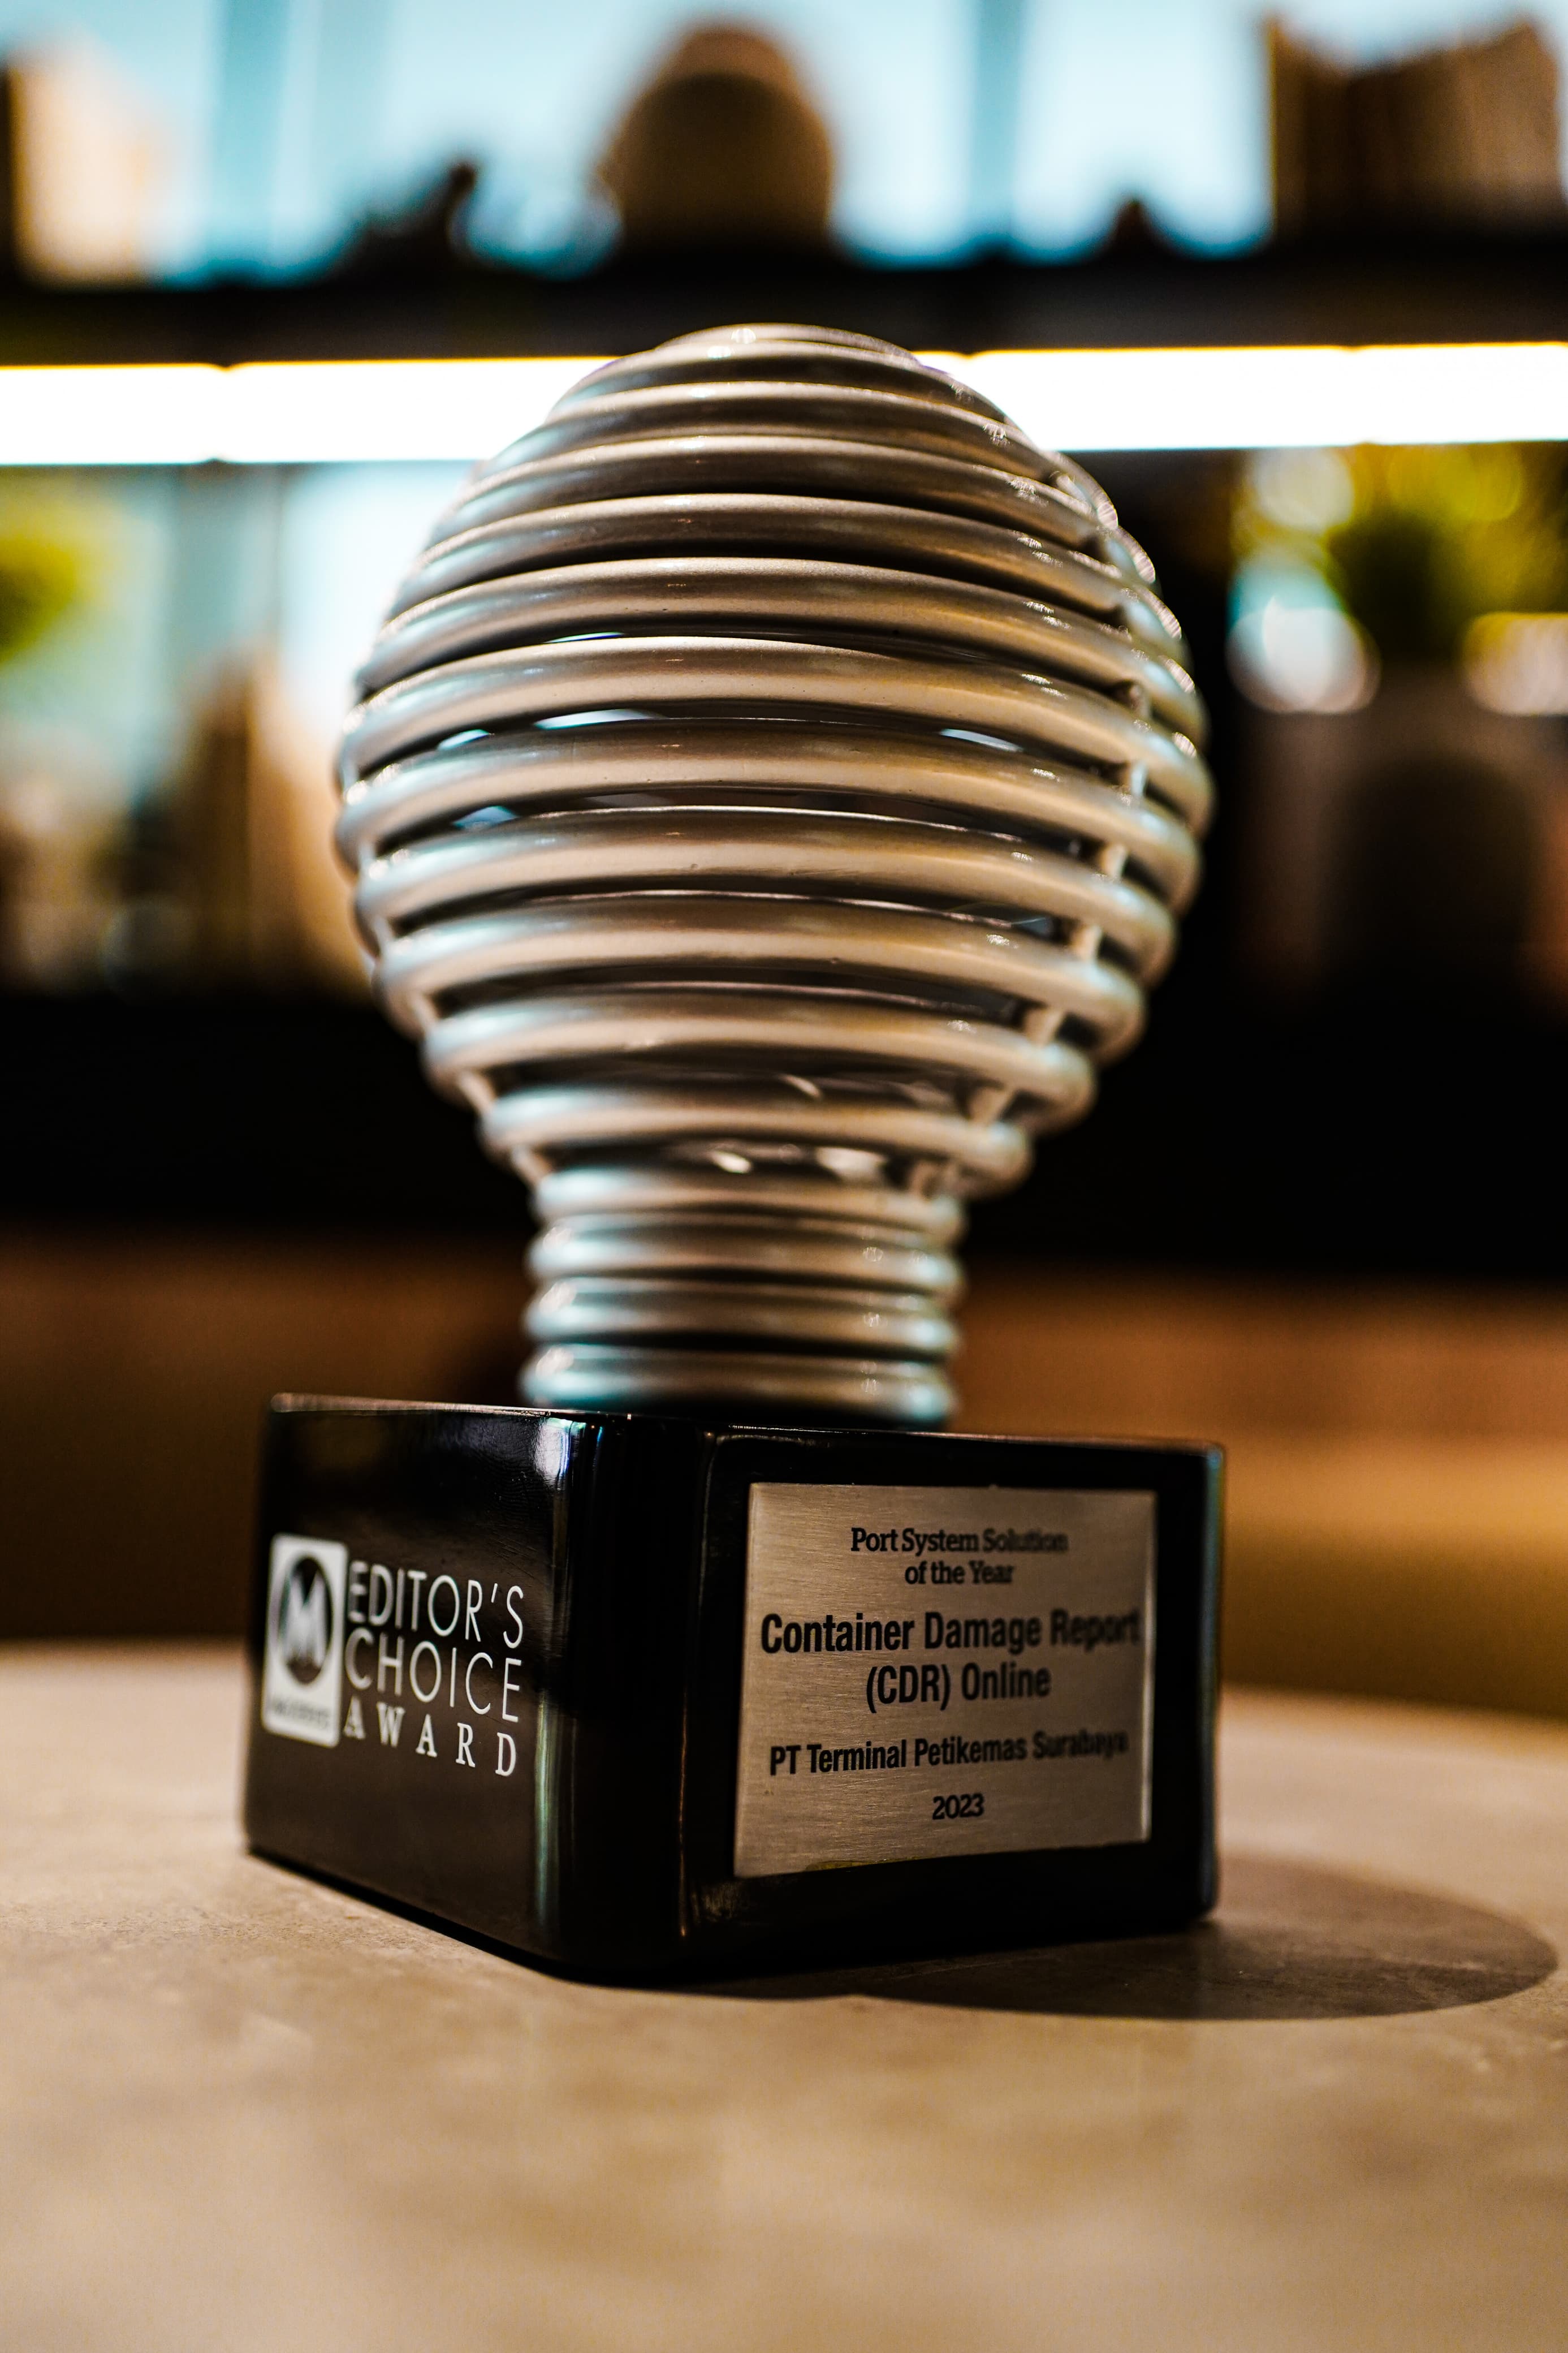 Award Trophy for the Port System Solution of the Year category, through the Container Damage Report (CDR) Online application.